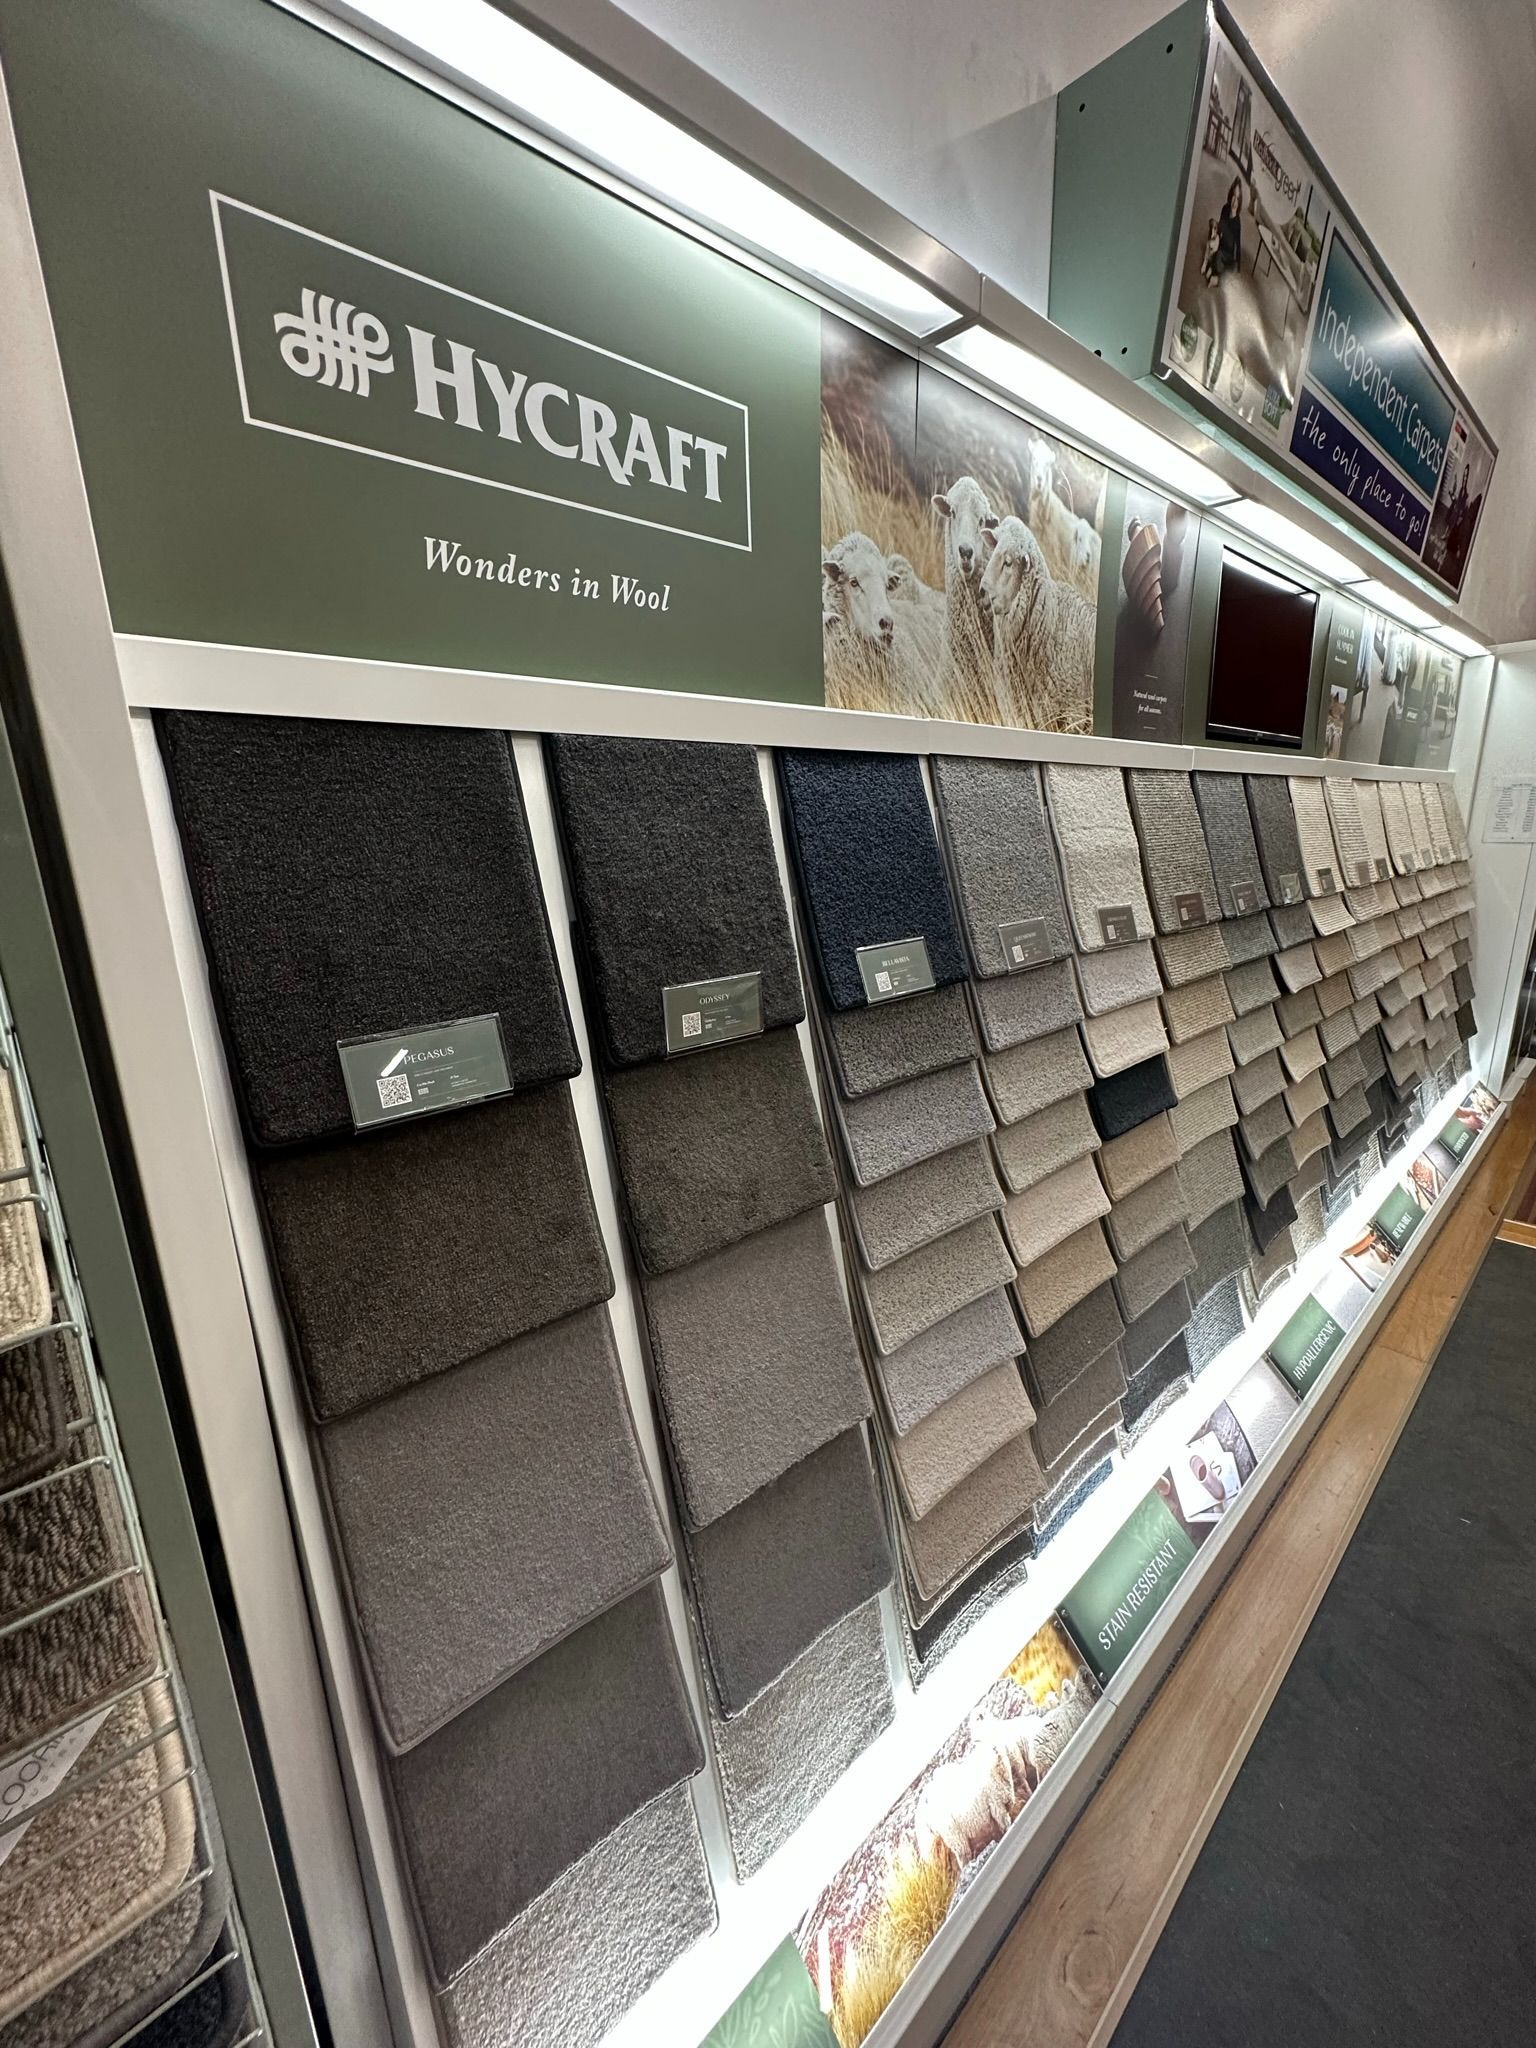 Carpet Options Displayed in Showroom — Flooring Supply & Installation In Port Macquarie, NSW